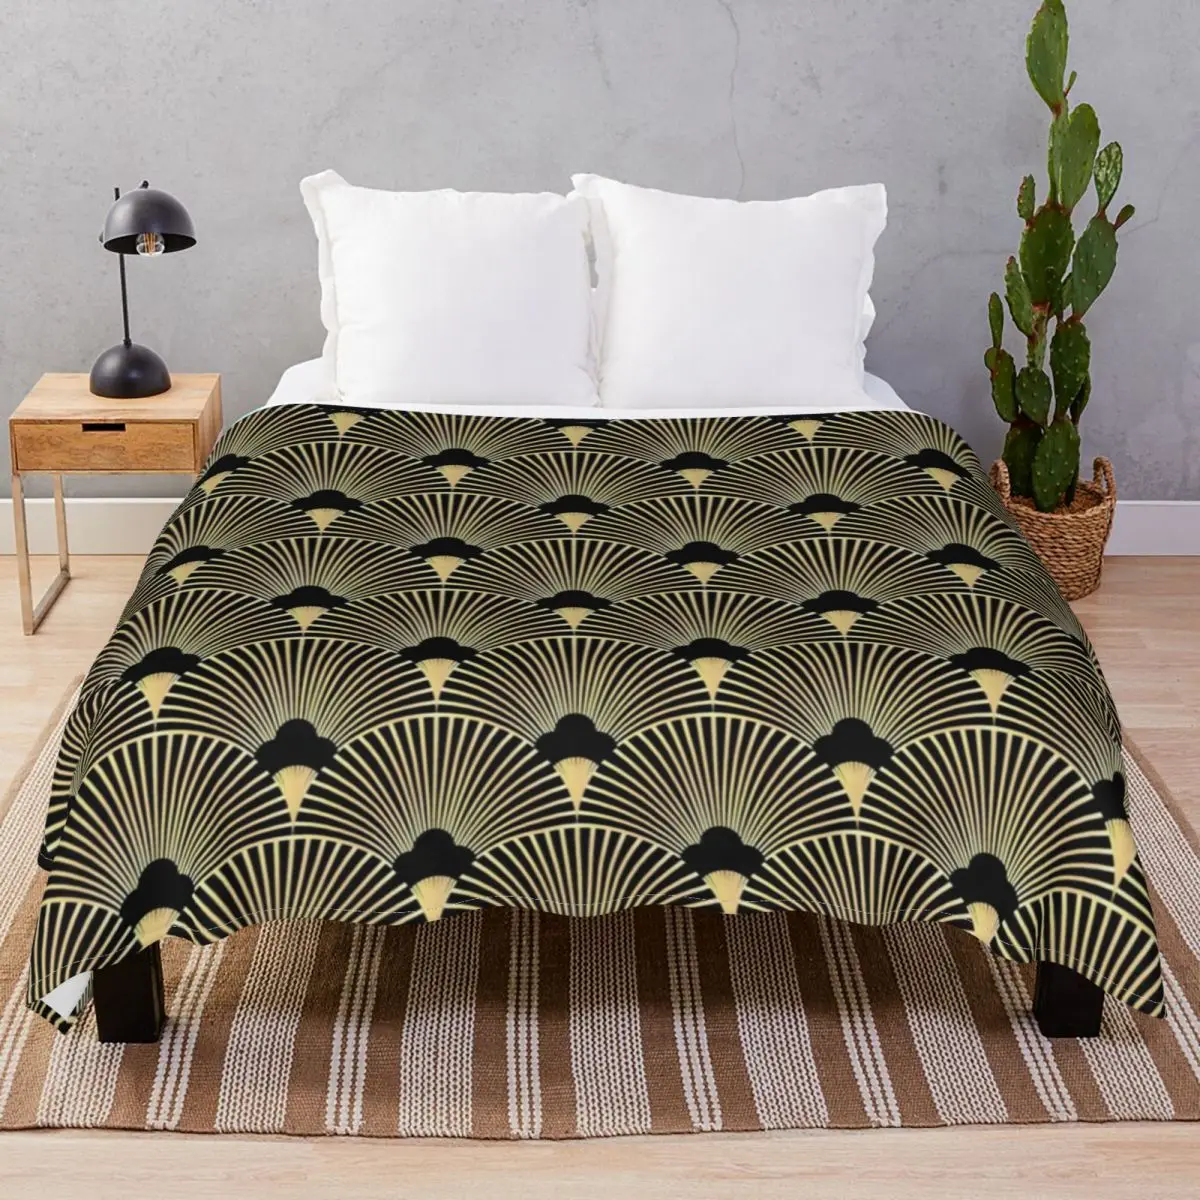 Art Deco Fan Blanket Flannel Winter Soft Throw Blankets for Bed Home Couch Travel Office